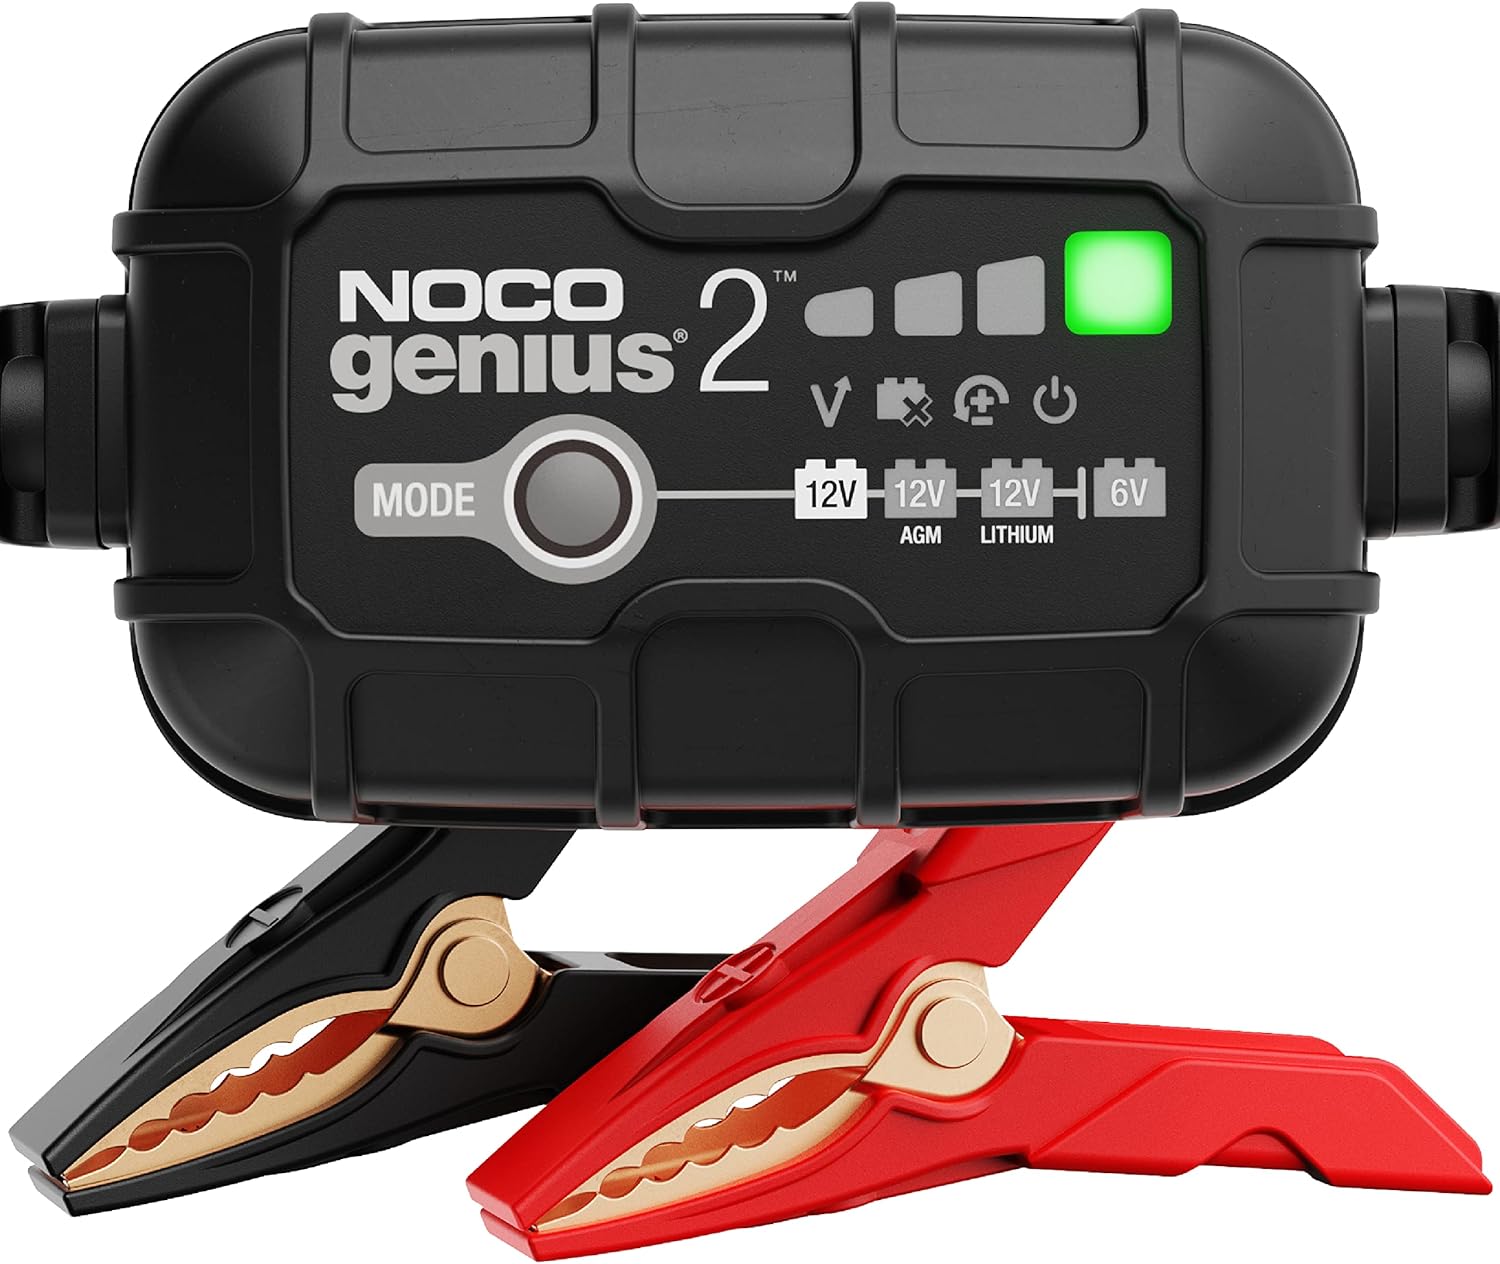 NOCO GENIUS2, 2A Smart Car Battery Charger, 6V and 12V Automotive Charger, Battery Maintainer, Trickle Charger, Float Charger and Desulfator for Motorcycle, ATV, Lithium and Deep Cycle Batteries - NOCO GENIUS2 Battery Charger Review